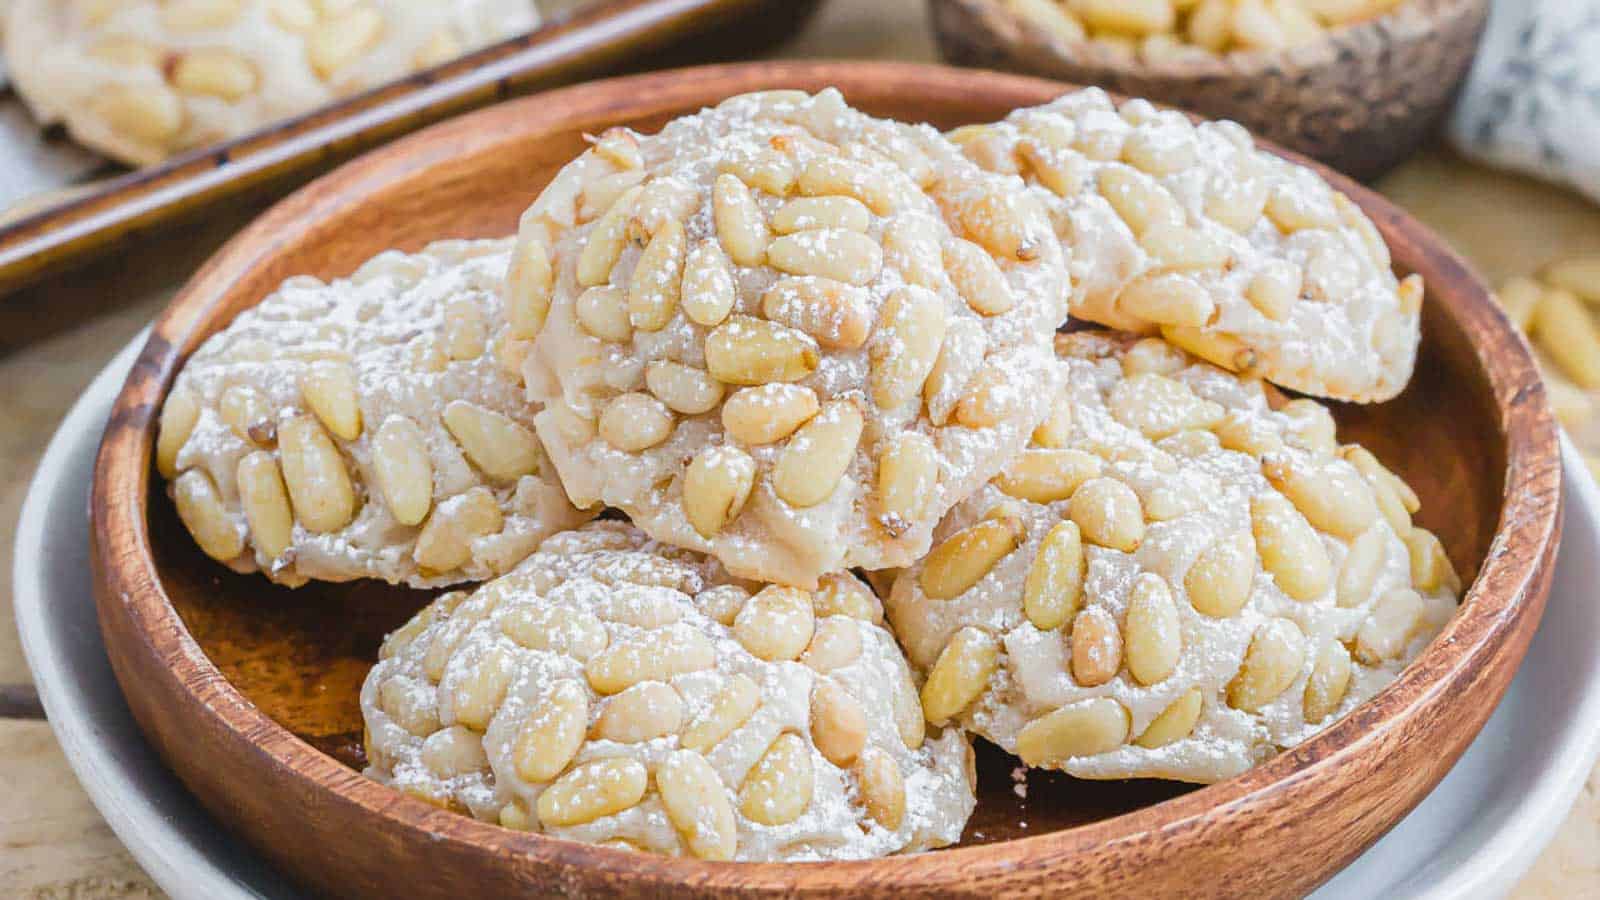 Almond cookies with powdered sugar in a wooden bowl.